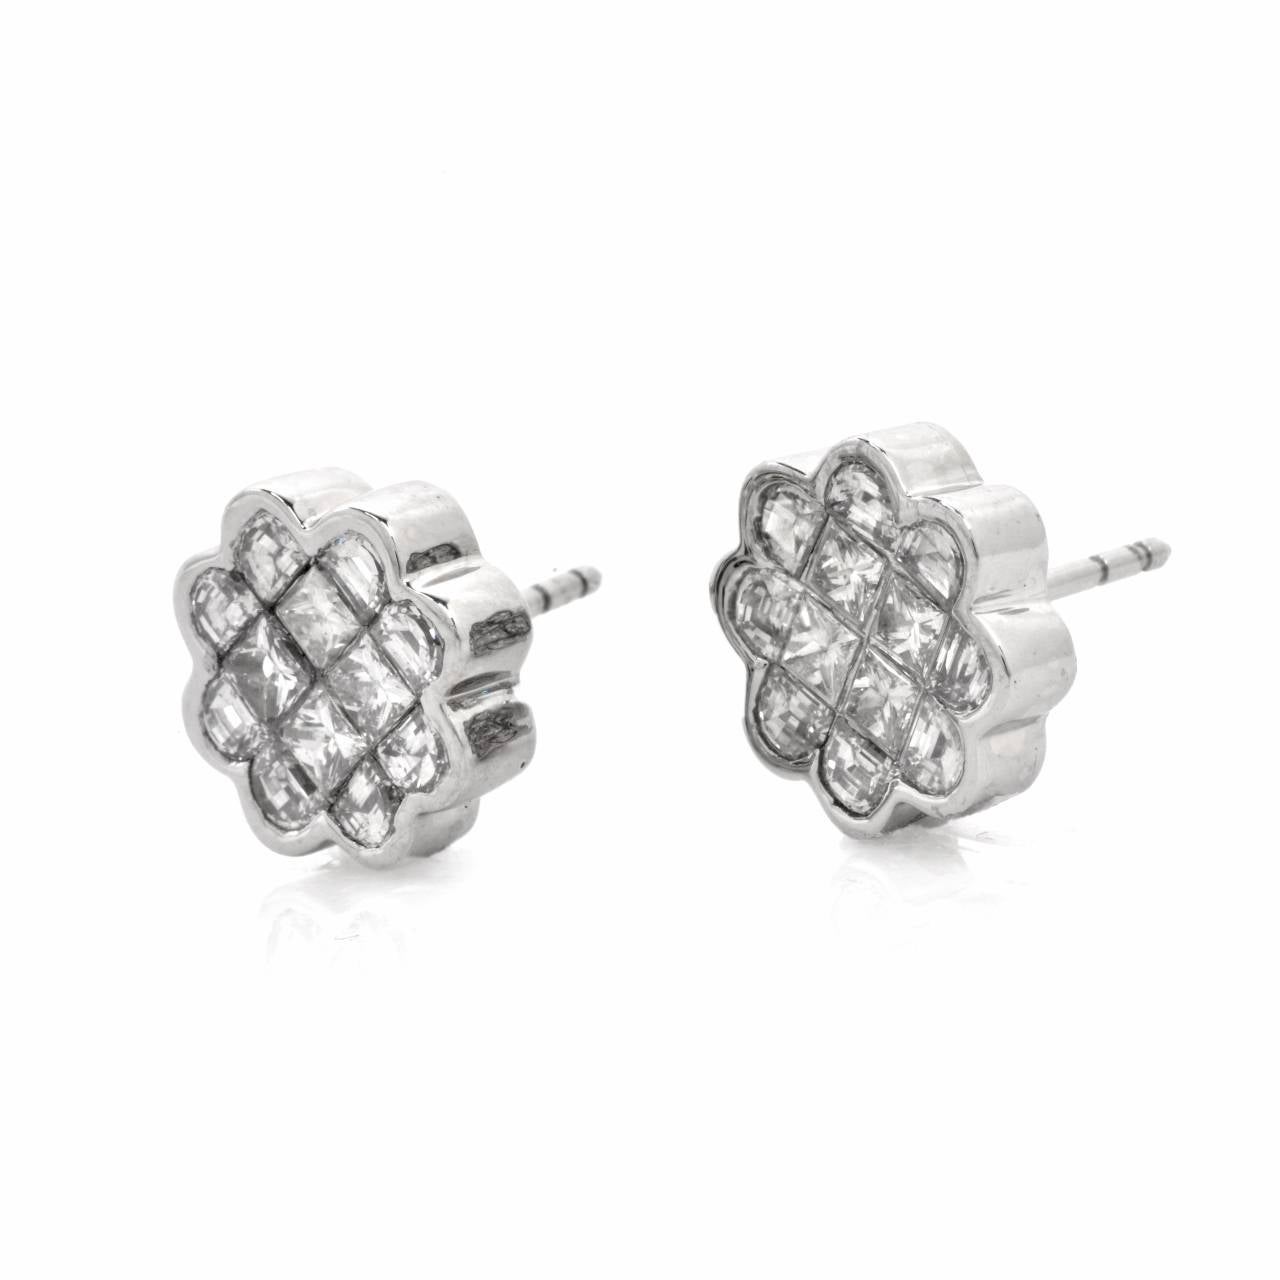 These estate stud earrings with Princess-cut and  Half-moon diamonds are crafted in solid 14K white gold, weigh approximately 9.00 grams and measure 11 mm in diameter. Designed as delicate flower heads with gracefully scalloped perimeter , these 